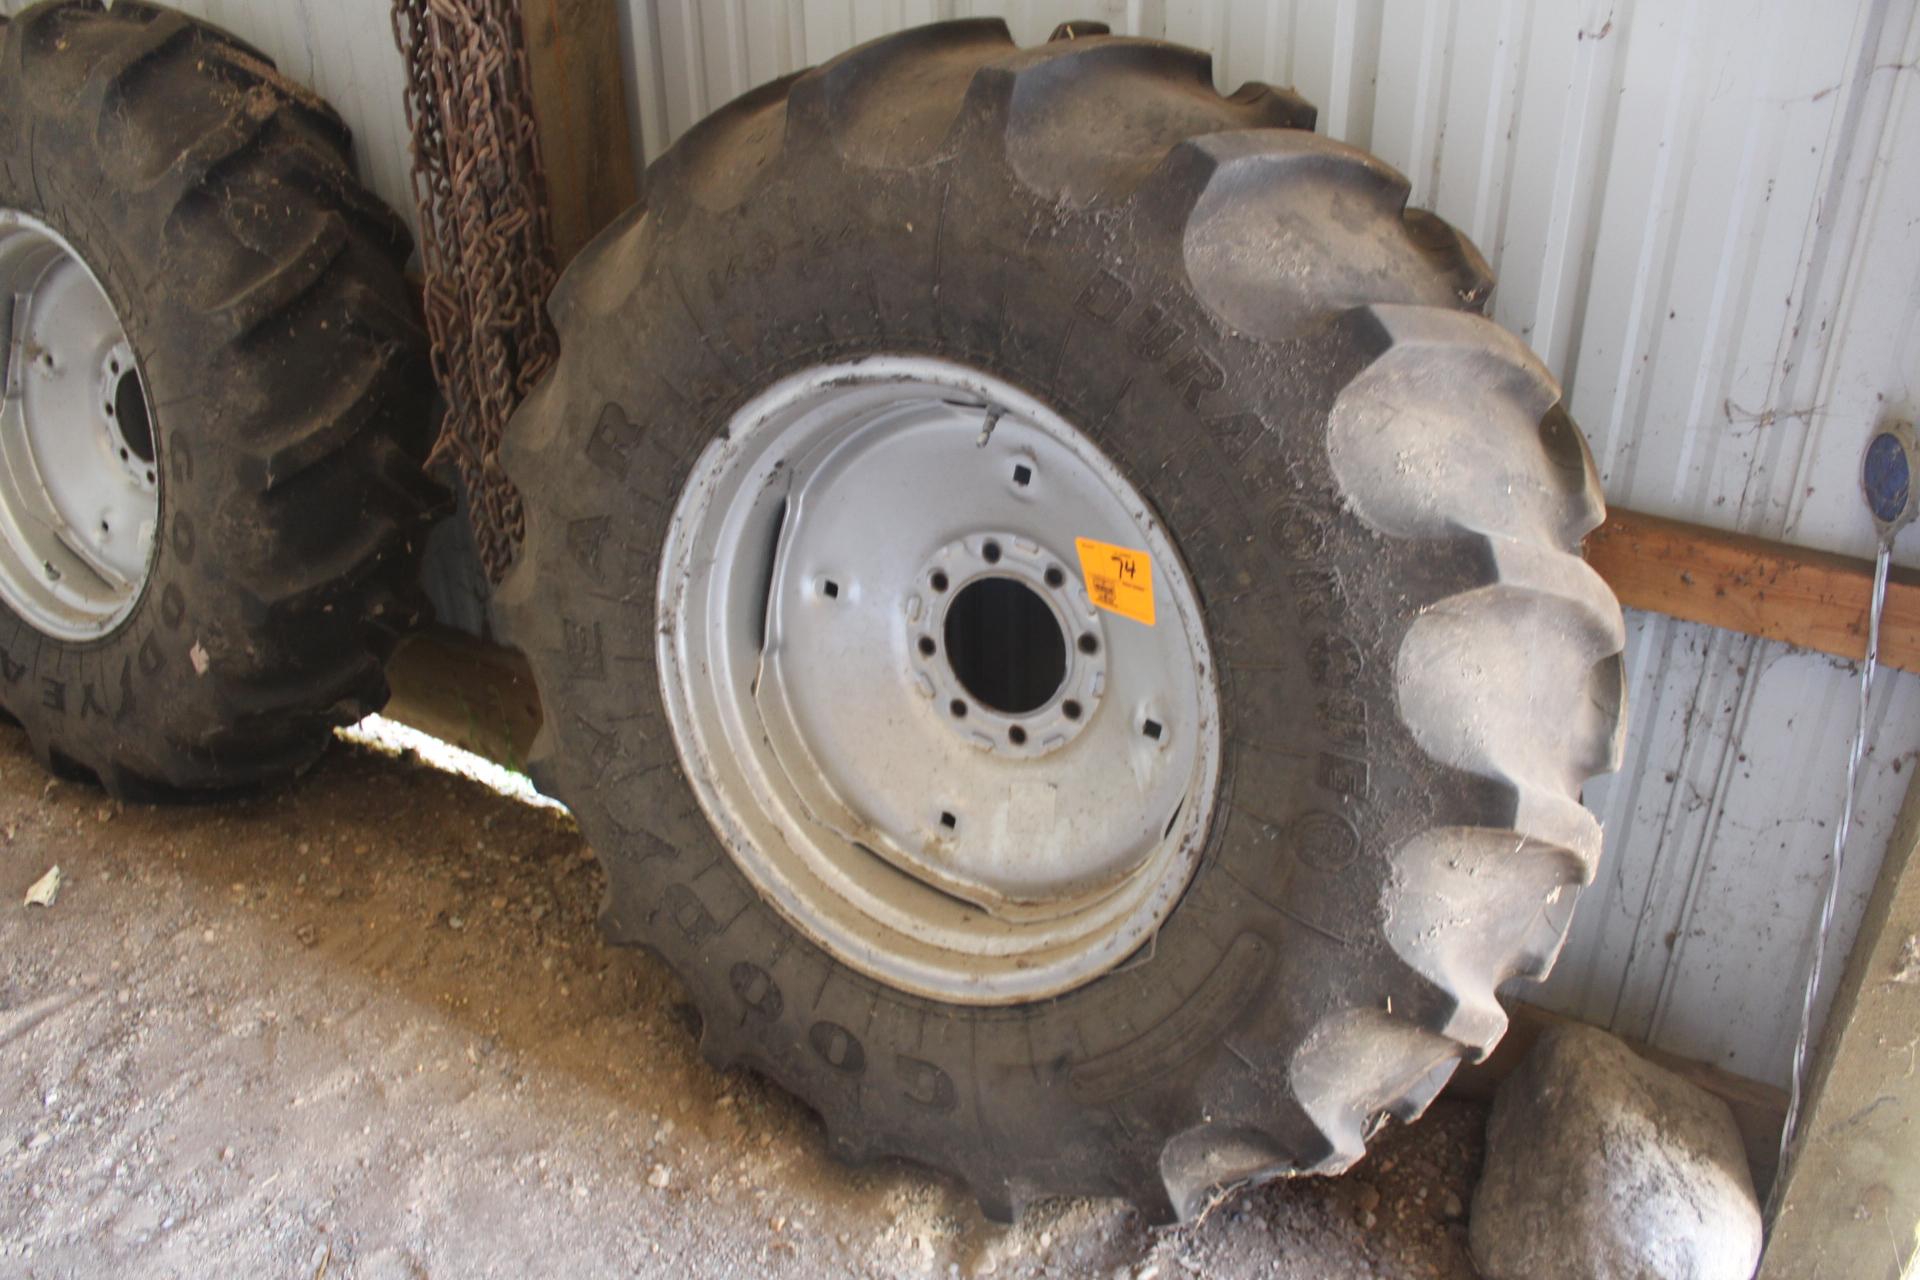 (2) 14.9-24 Tractor Tires on 8 Bolt Rims